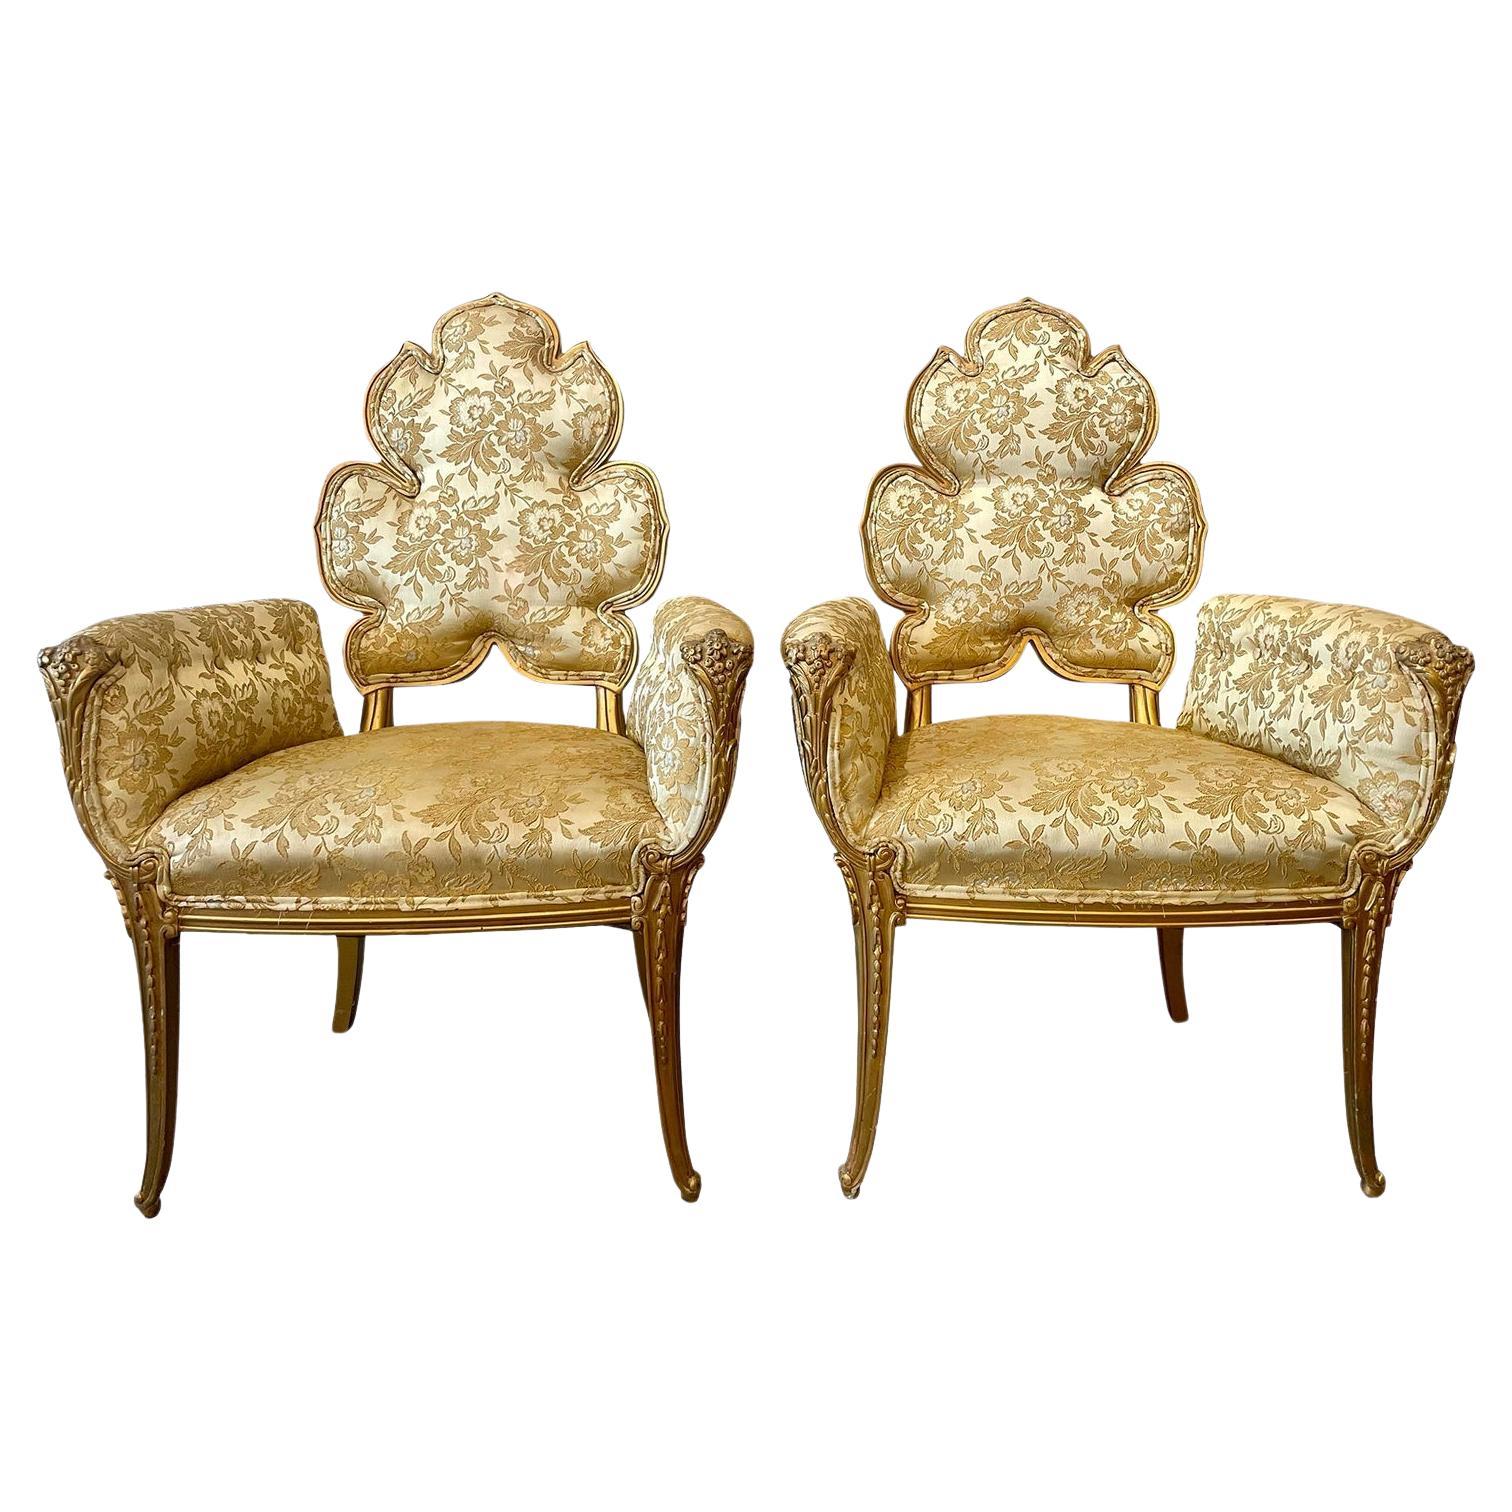 1940s Grosfeld House Leaf Flower Chairs - a Pair For Sale